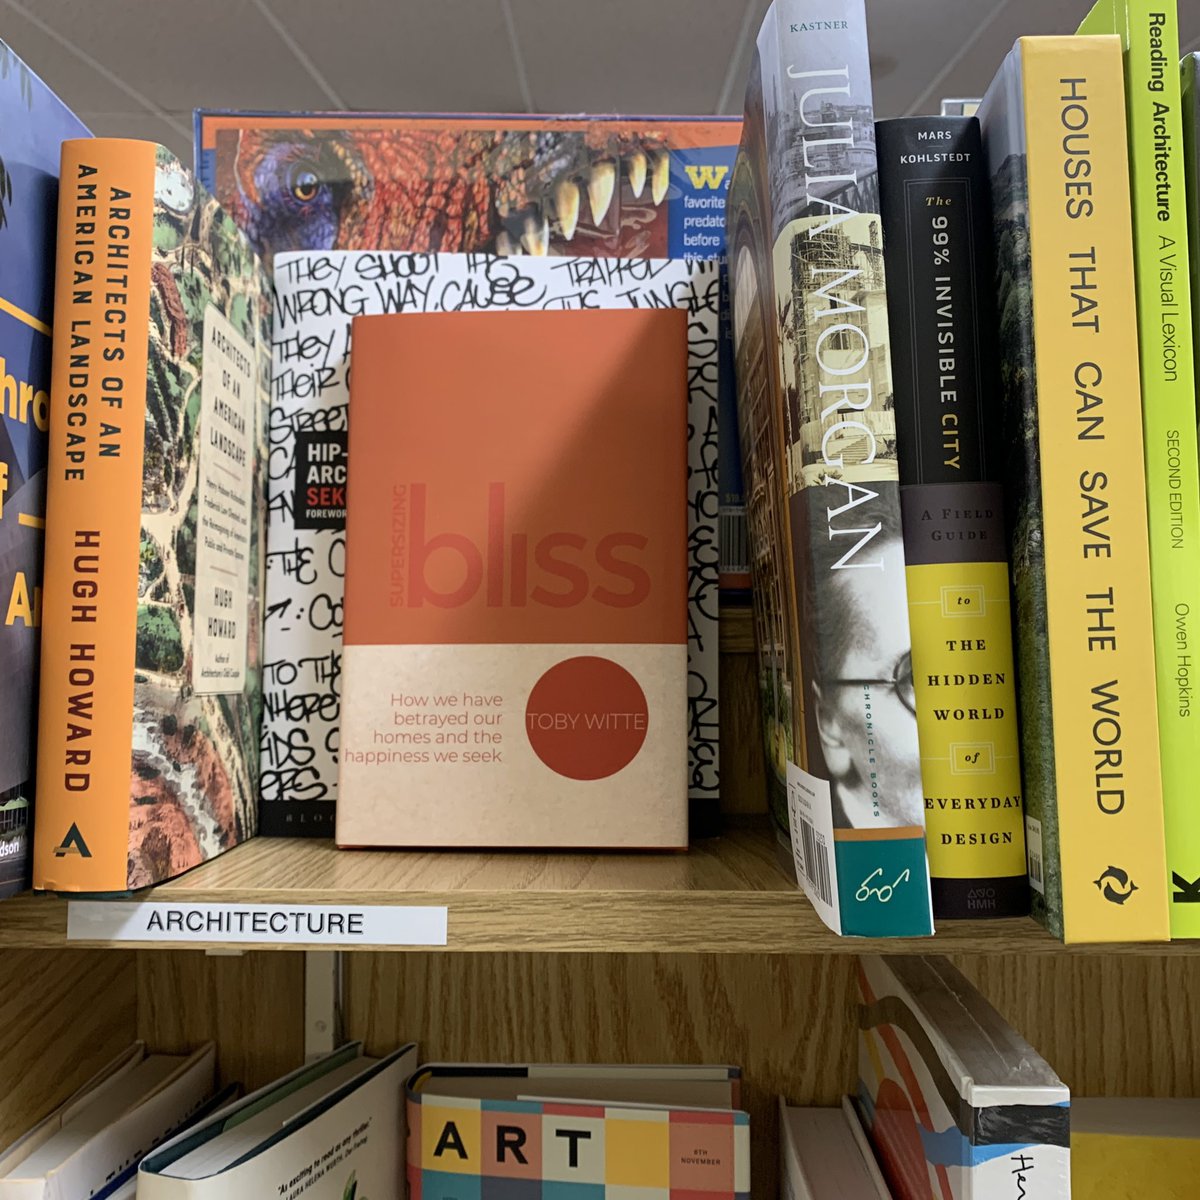 Supersizing Bliss is now available at @ParkRoadBooks in Charlotte, NC - SUPPORT YOUR LOCAL BOOKSTORE !!
..
#bookstore #localbookstore #readlocal #parkroadbooks #supersizingbliss #tobywitte #book #books #author #modernhome #designyourhome #happiness #happyhome #architecturebooks